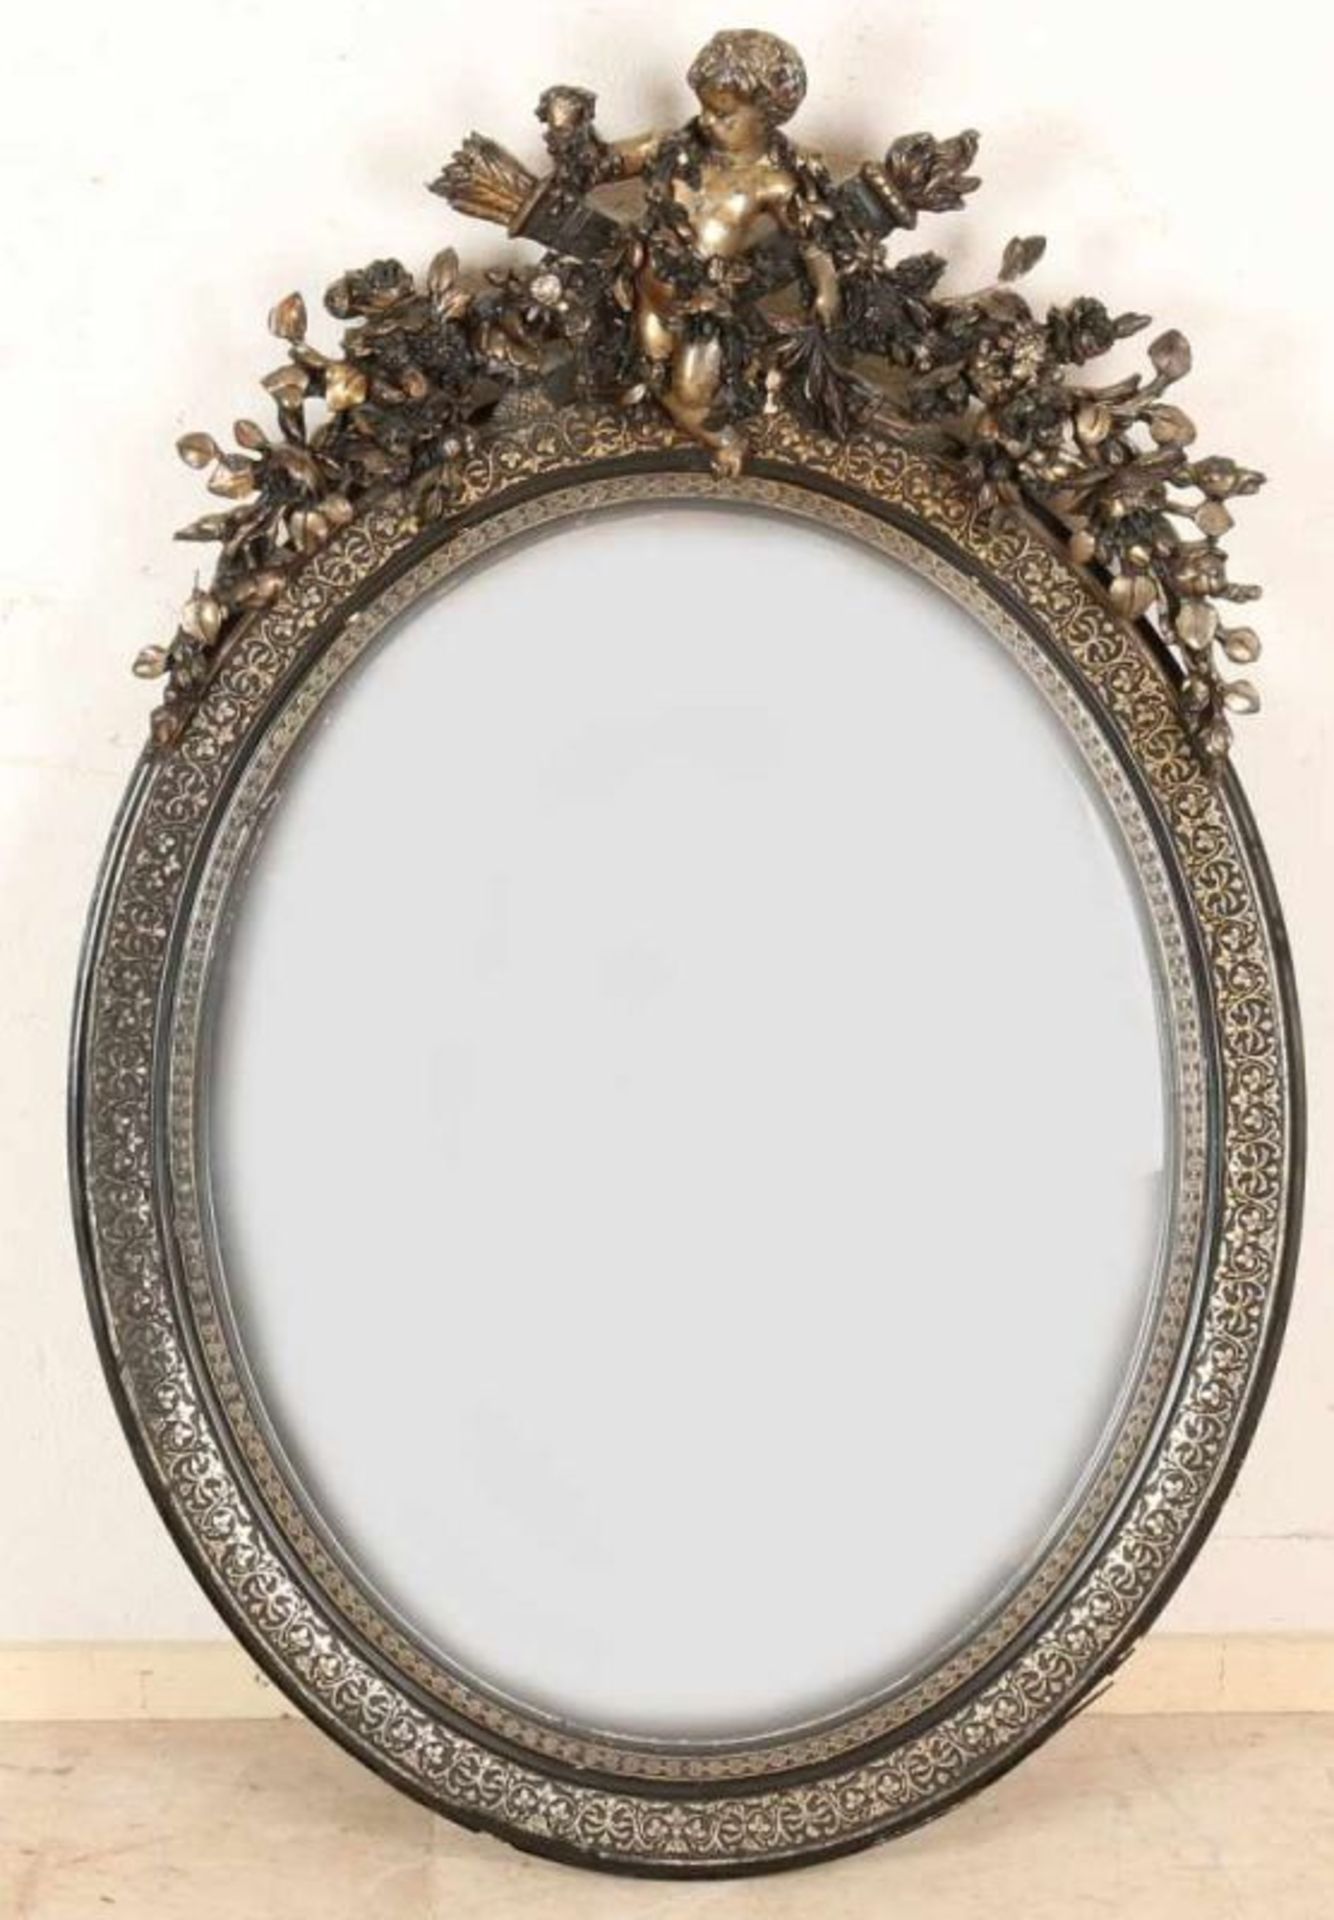 19th Century French stucco mirror with putti, festoons and double-faceted mirror. Circa 1870.